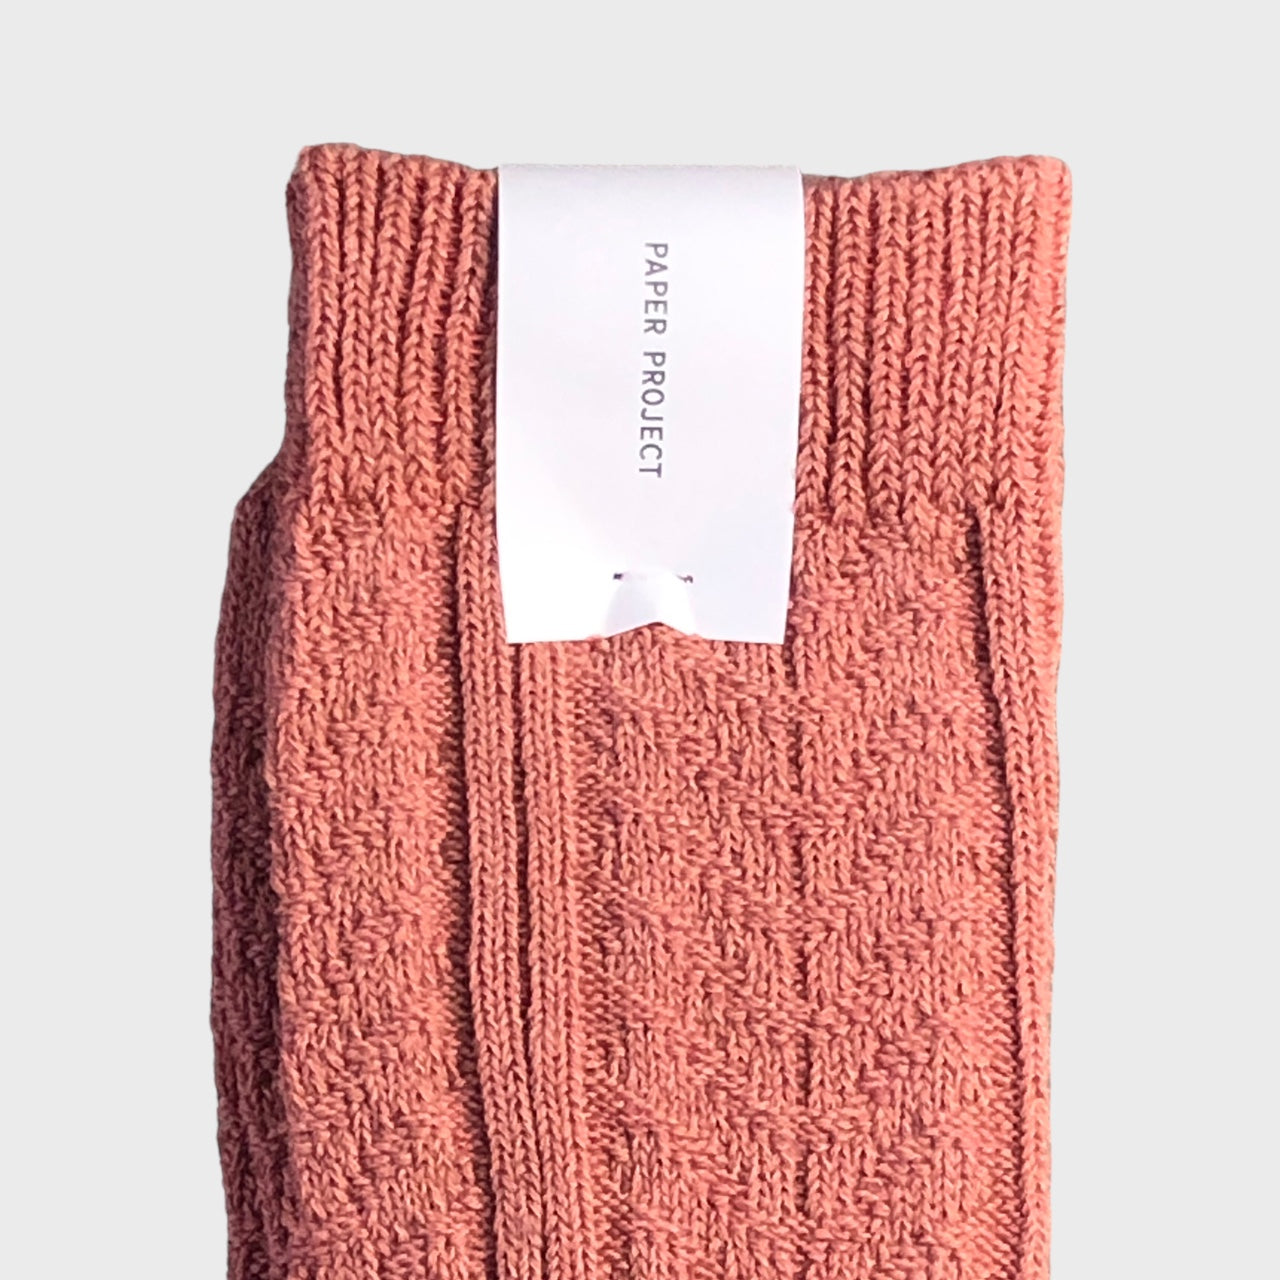 Paper Project - Superwash Wool Cable Coral Socks